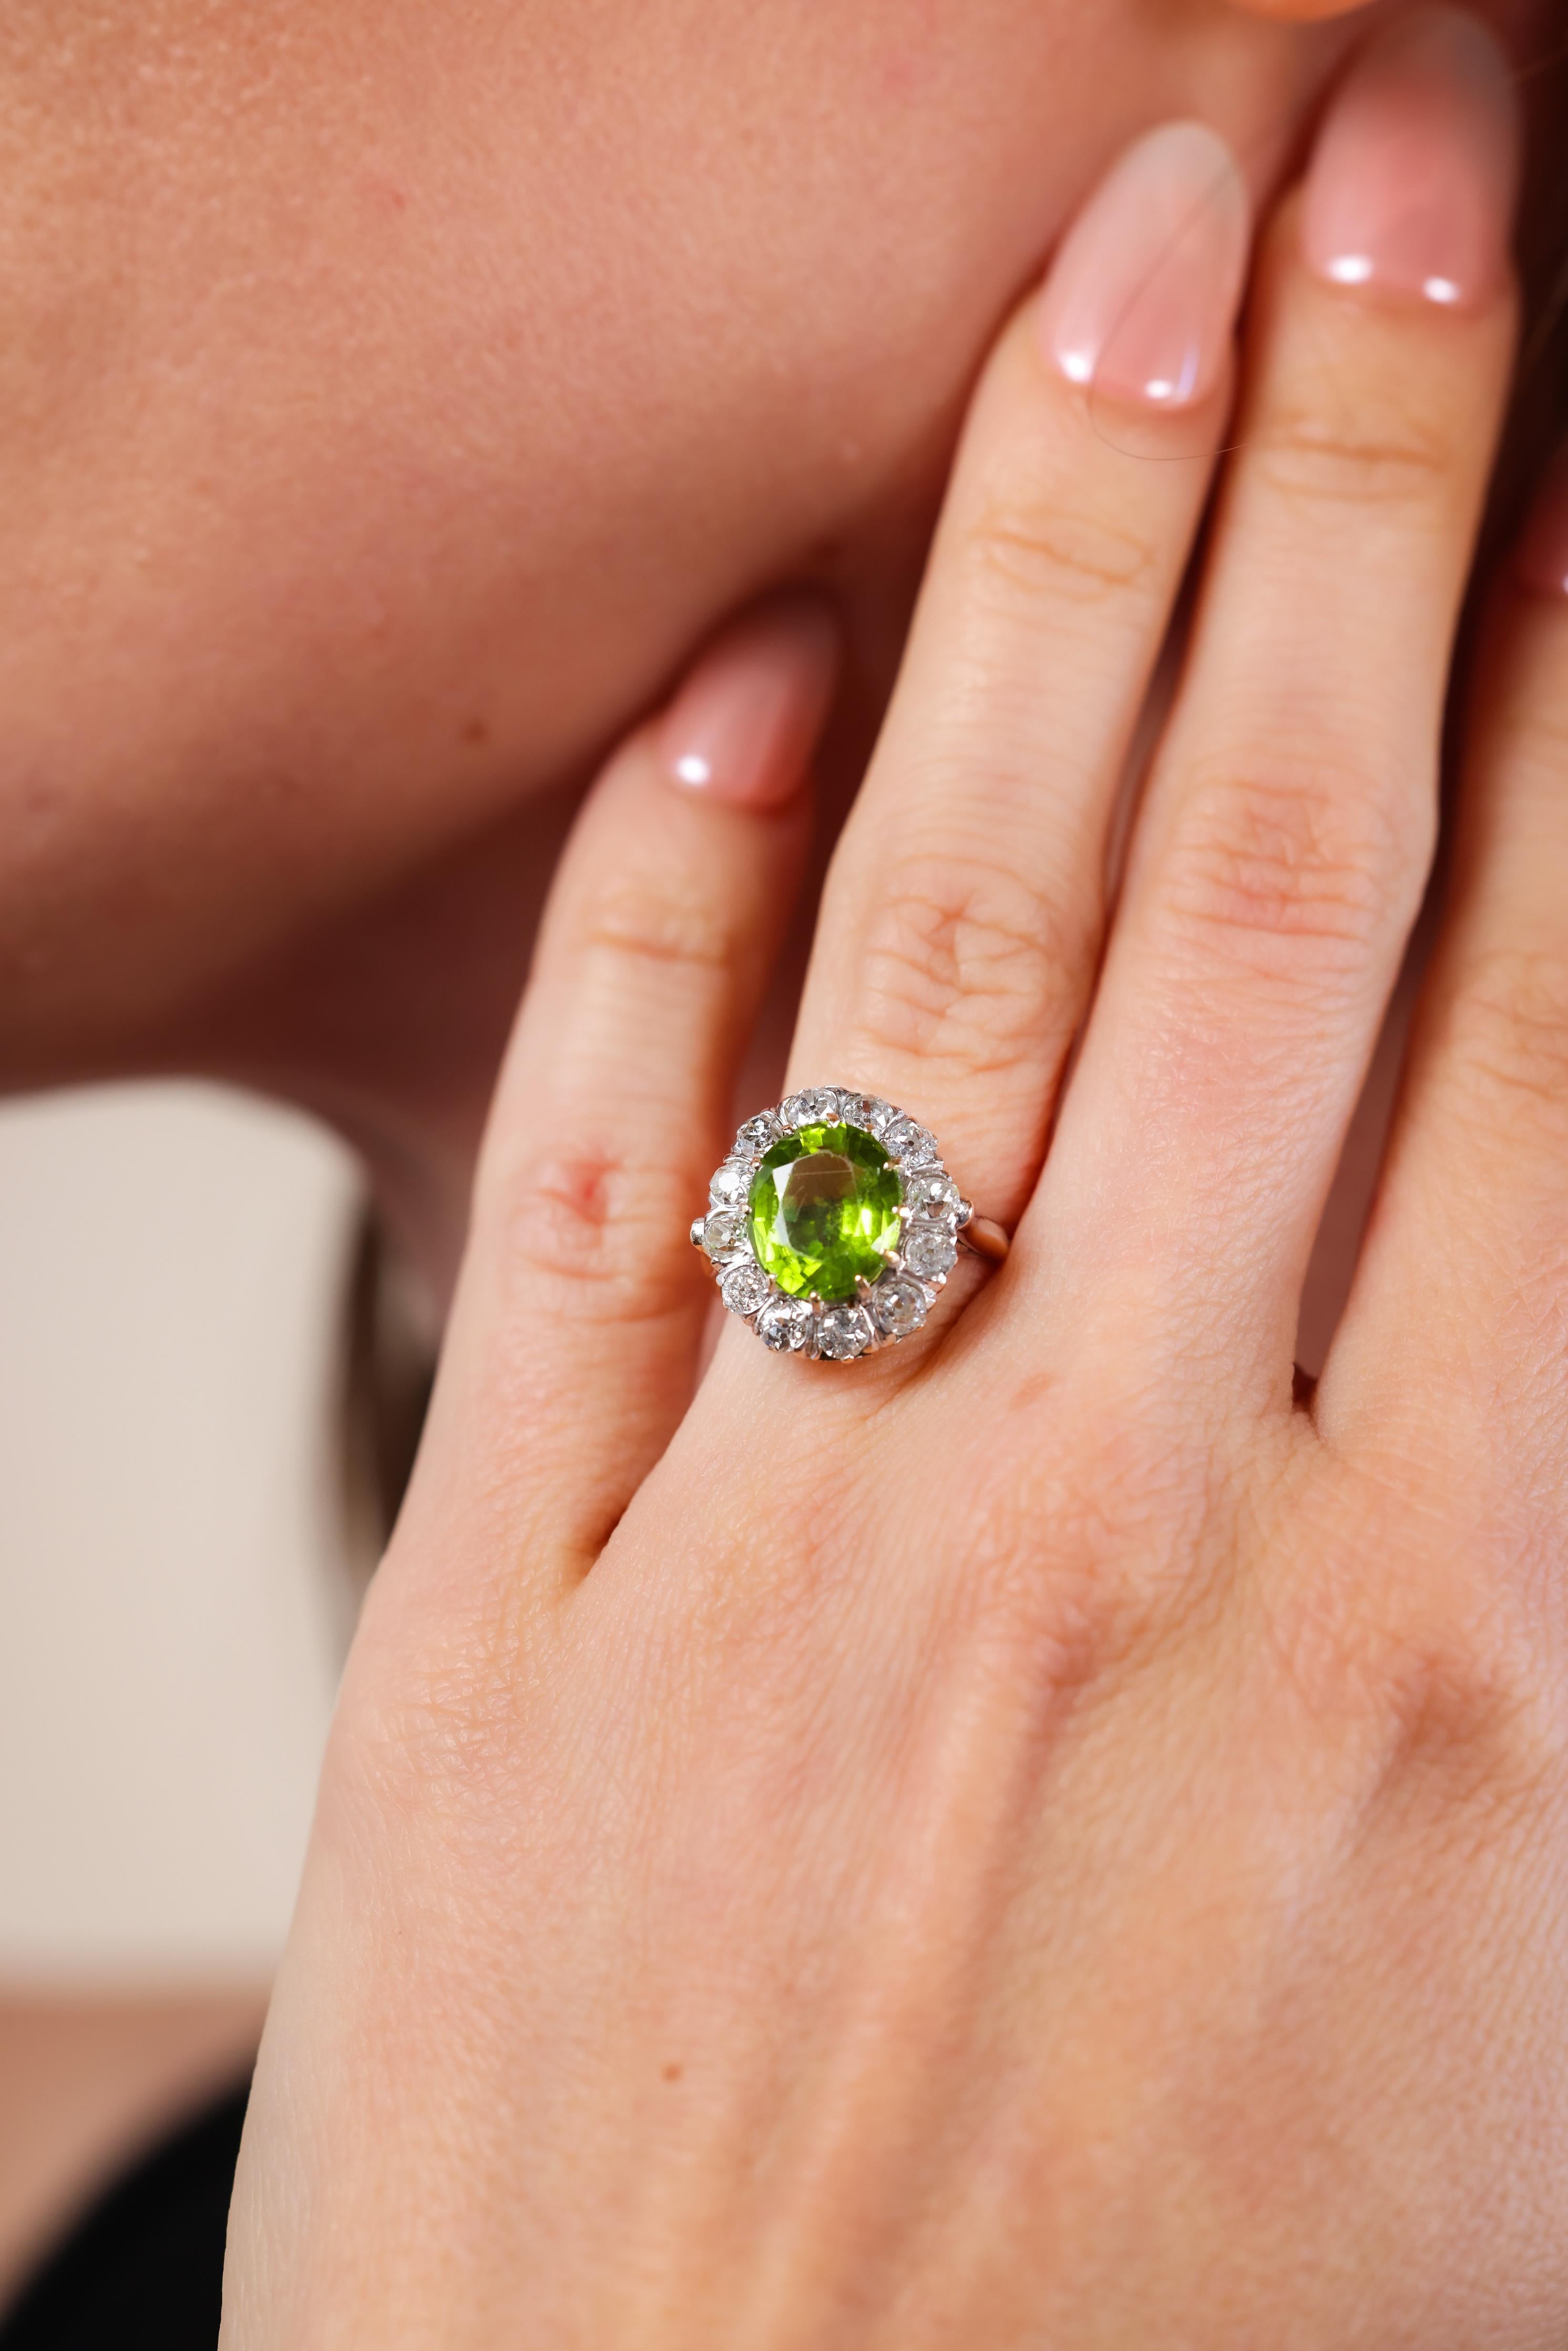 oval cut green peridot weighing approximately 3.1 carat
accented by 12 old european cut diamonds weighing approximately 1.2 carat
J-K color 
SI-included 
14k shank & 18k gold top white and yellow gold 
Victorian circa circa 1870s 
ring size 5-1/4